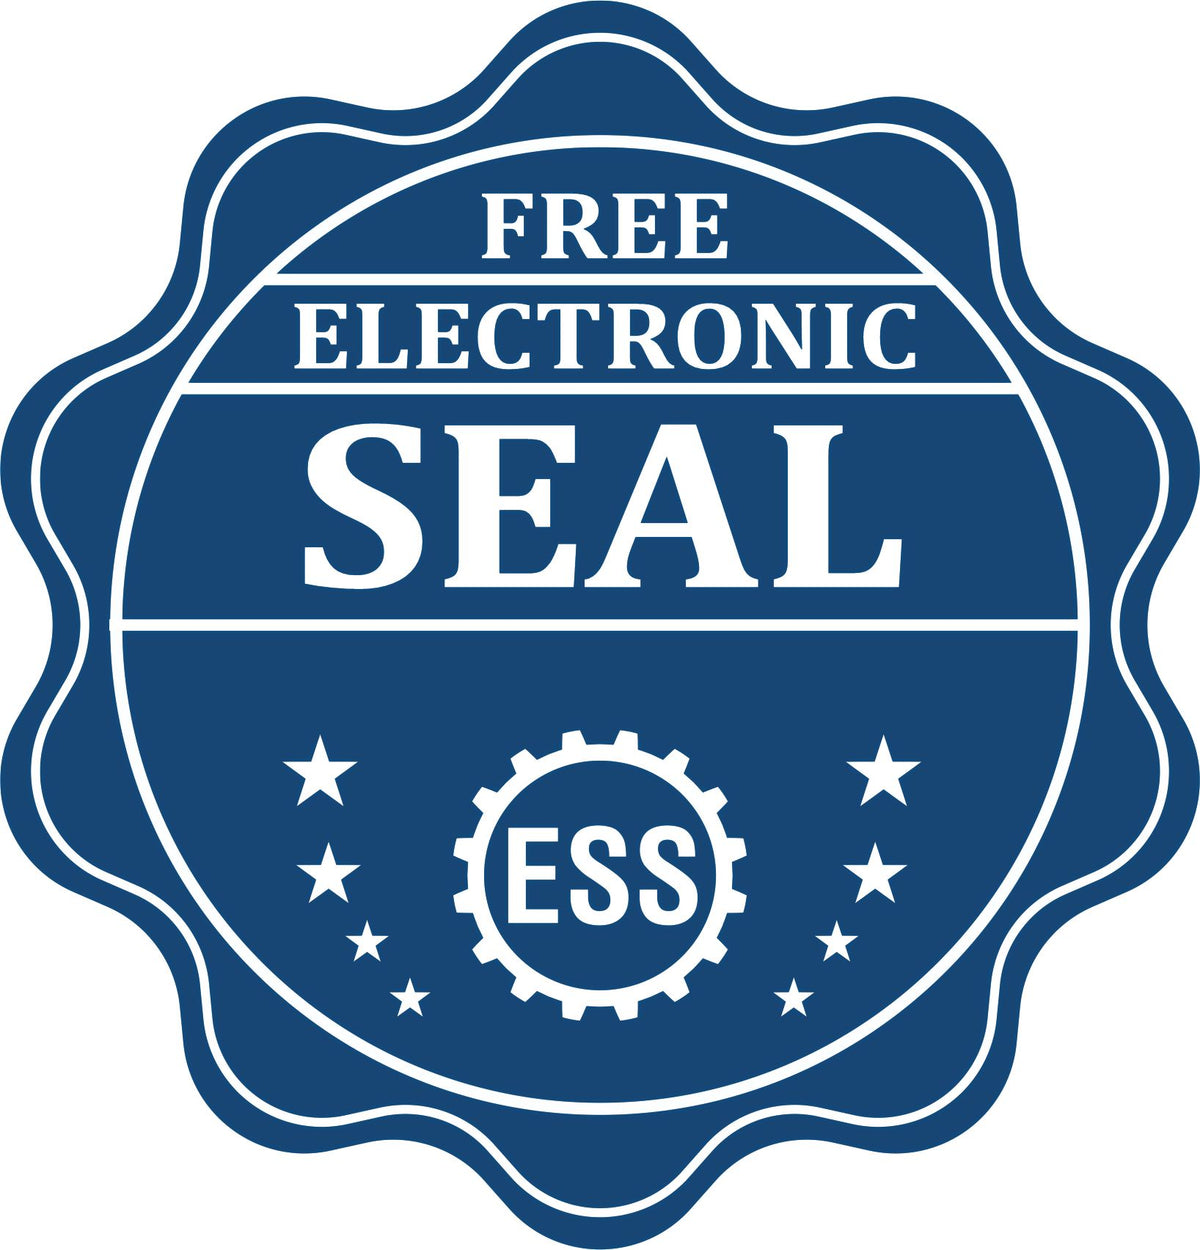 A badge showing a free electronic seal for the Slim Pre-Inked Louisiana Architect Seal Stamp with stars and the ESS gear on the emblem.